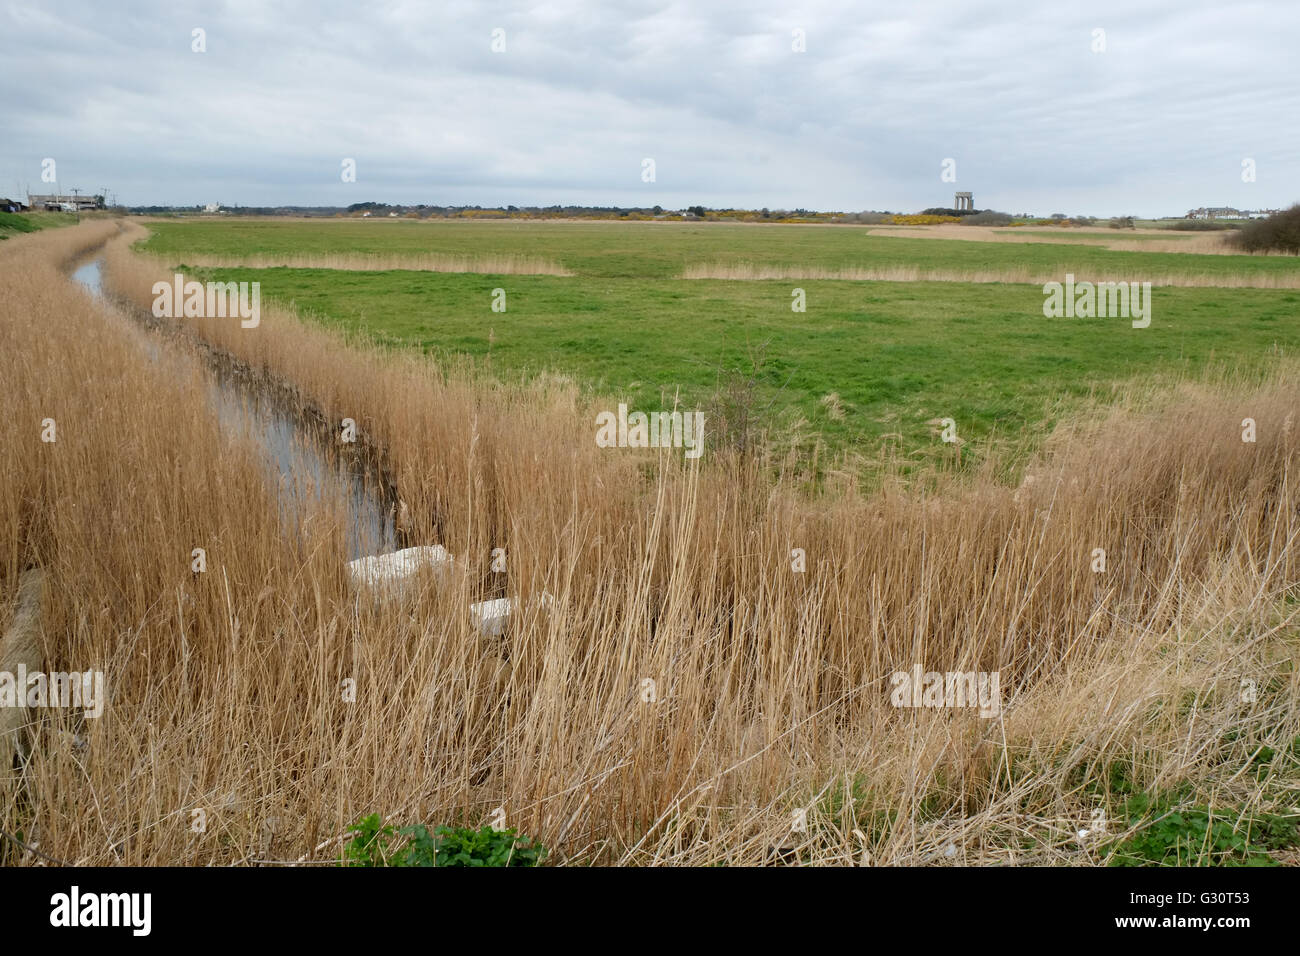 View from tourist favorite Southwold Harbor across the grazing meadows towards Southwold town in eastern Suffolk, England Stock Photo